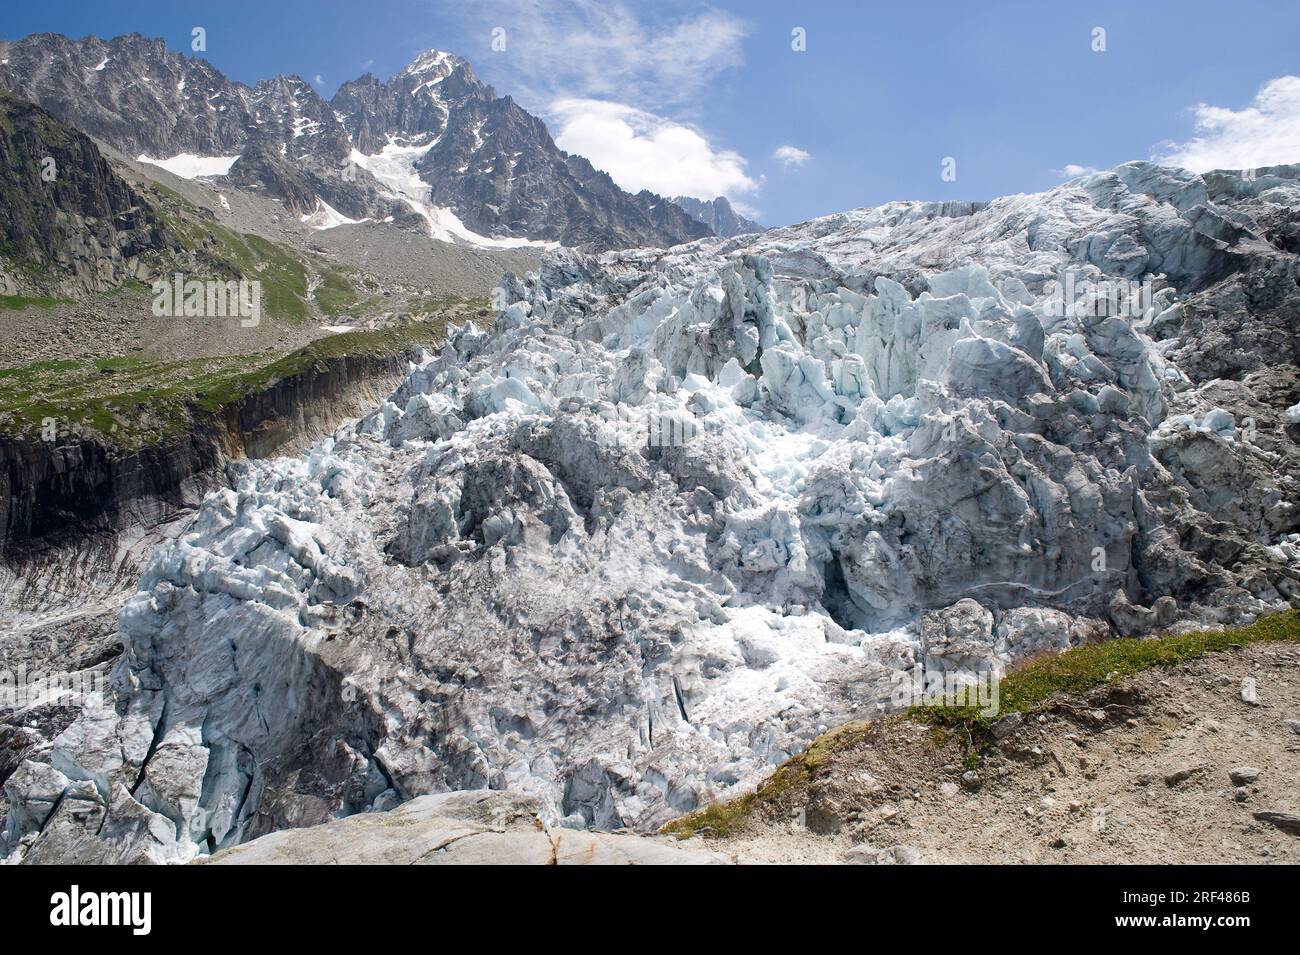 Argentiere glacier with  cirques, hanging valleys, aretes, horns, crevases and moraines. Chamonix-Mont Blanc, Alps, France. Stock Photo